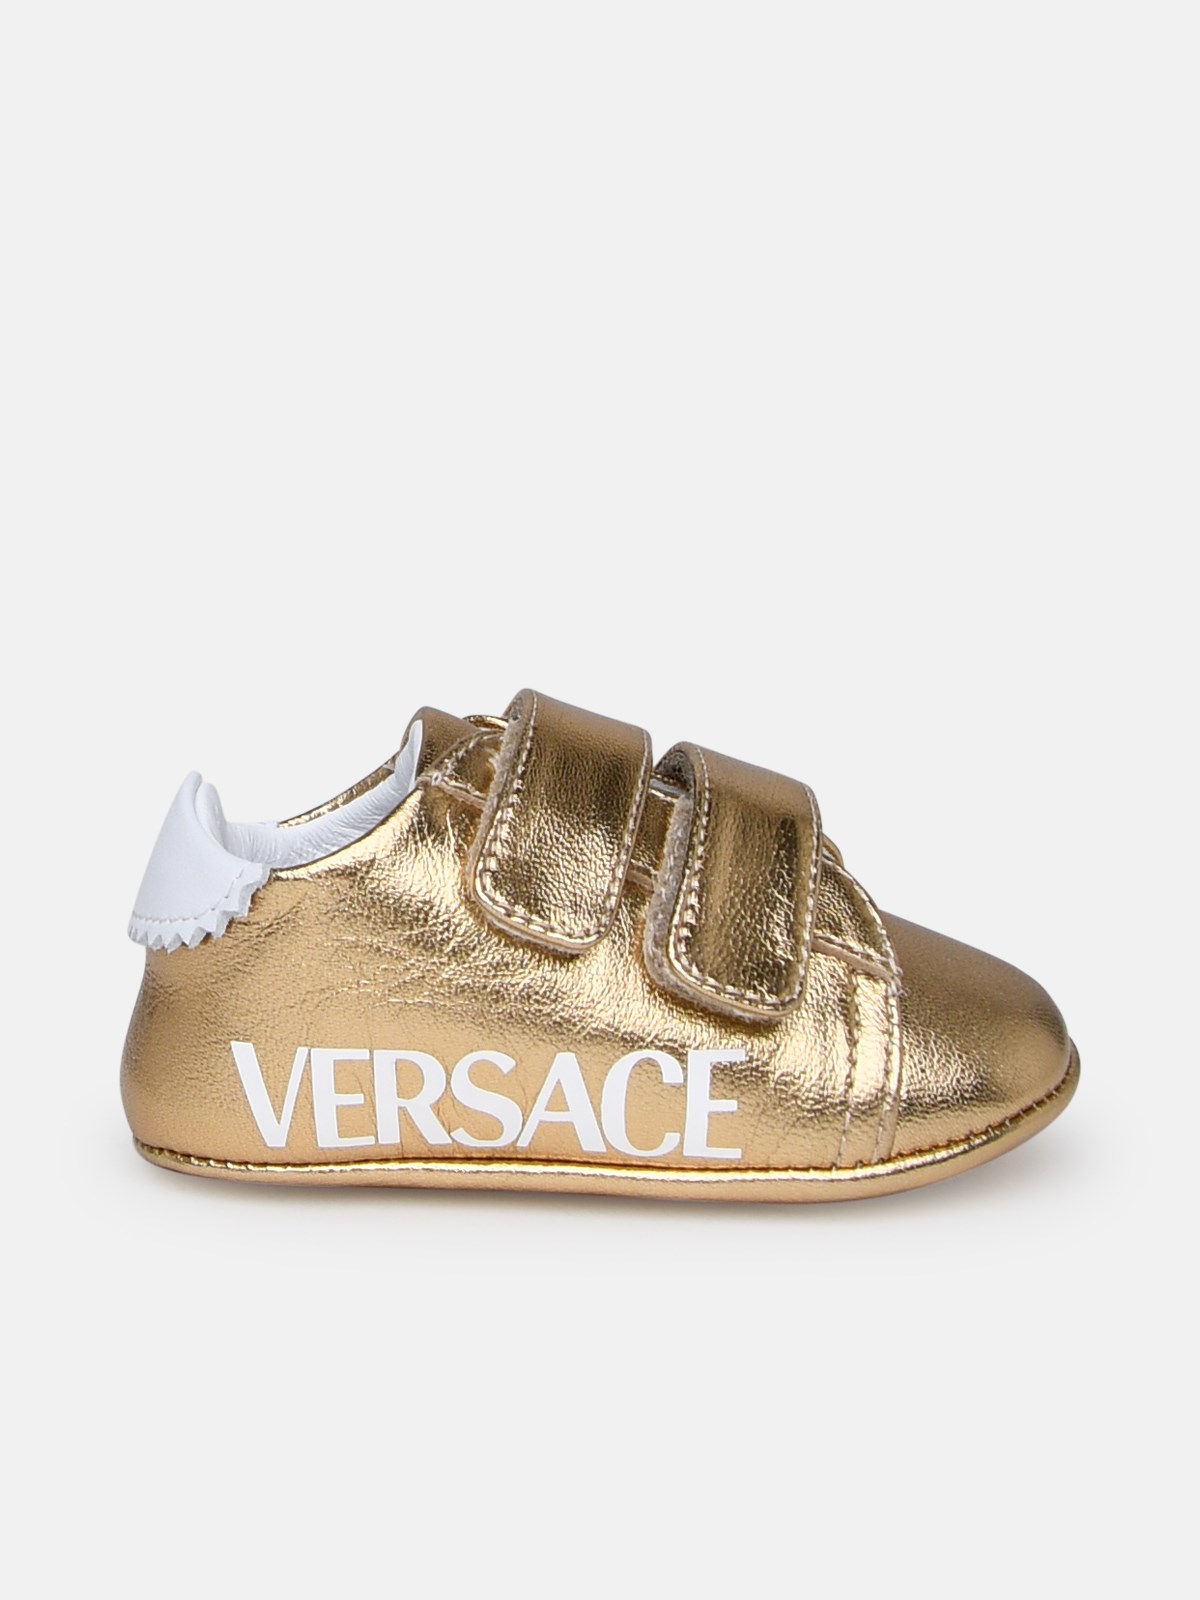 Versace Gold Leather Sneakers